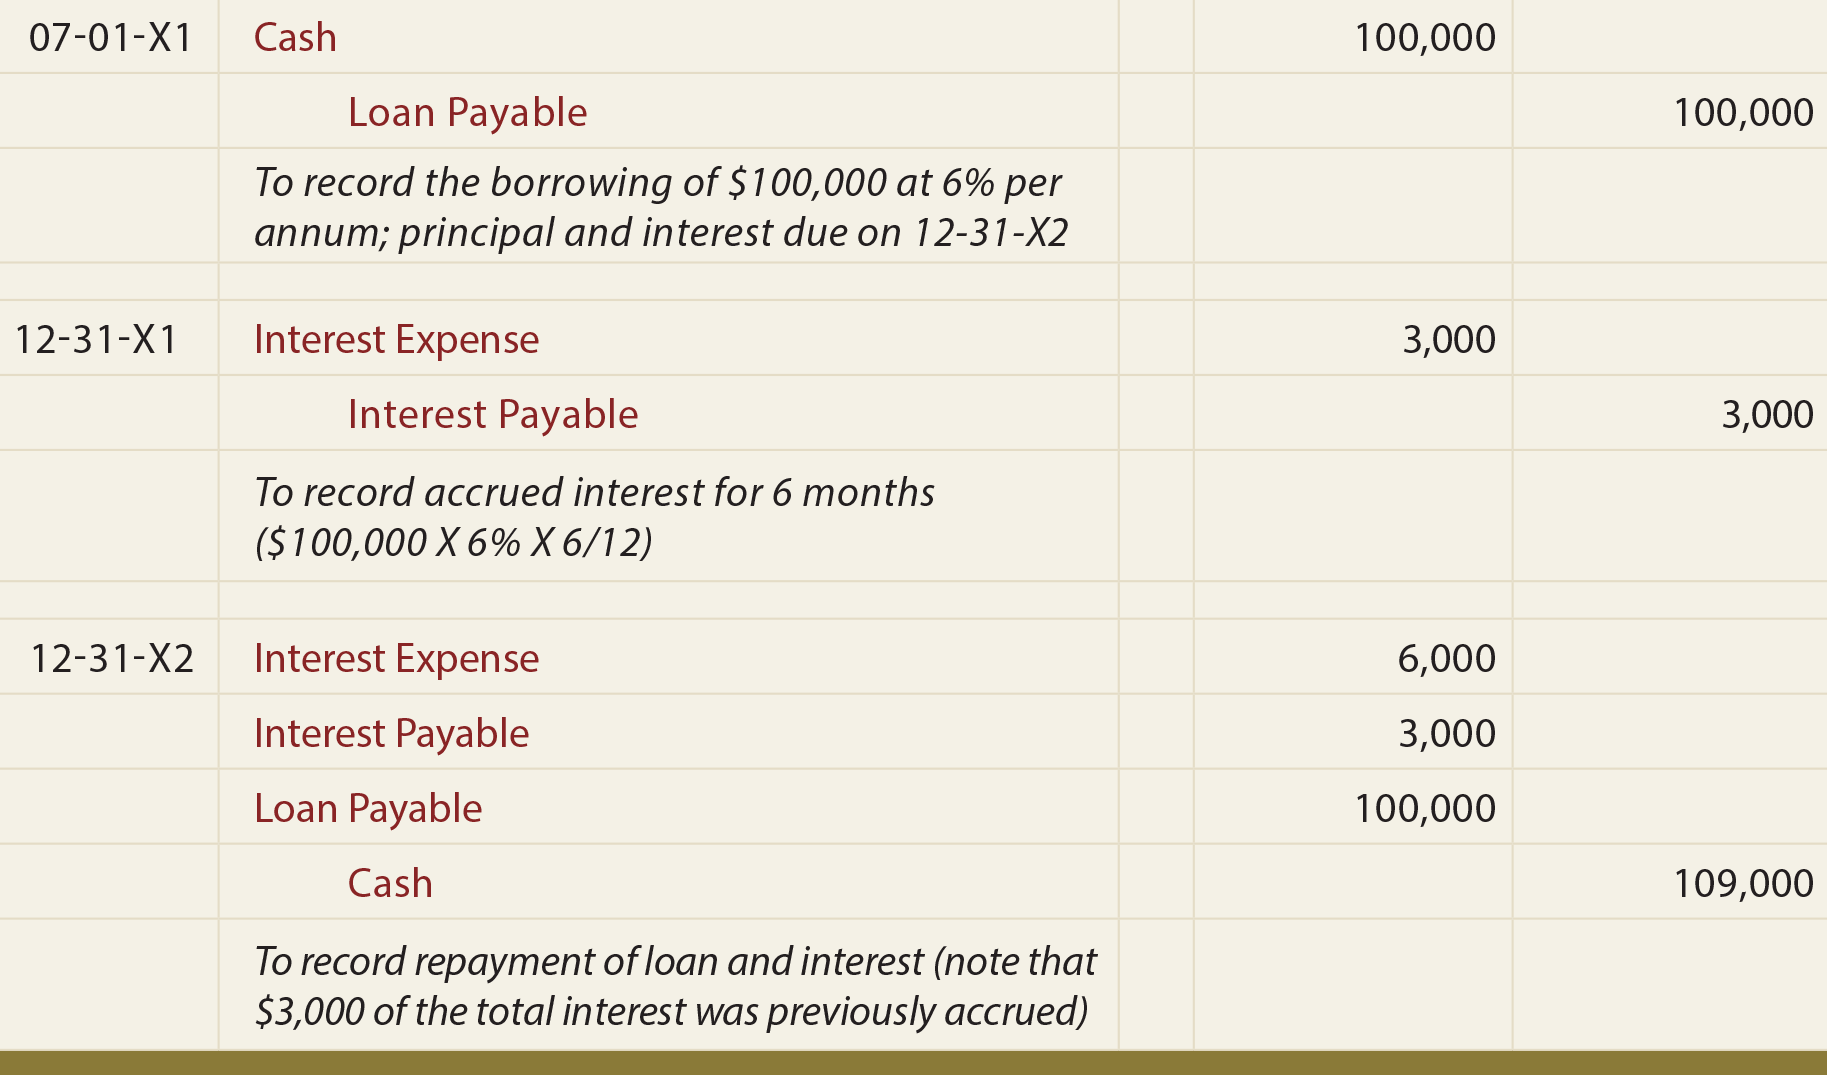 Loan/Note Payable General Journal Entry - To record loan payable, interest accrual, and repayment